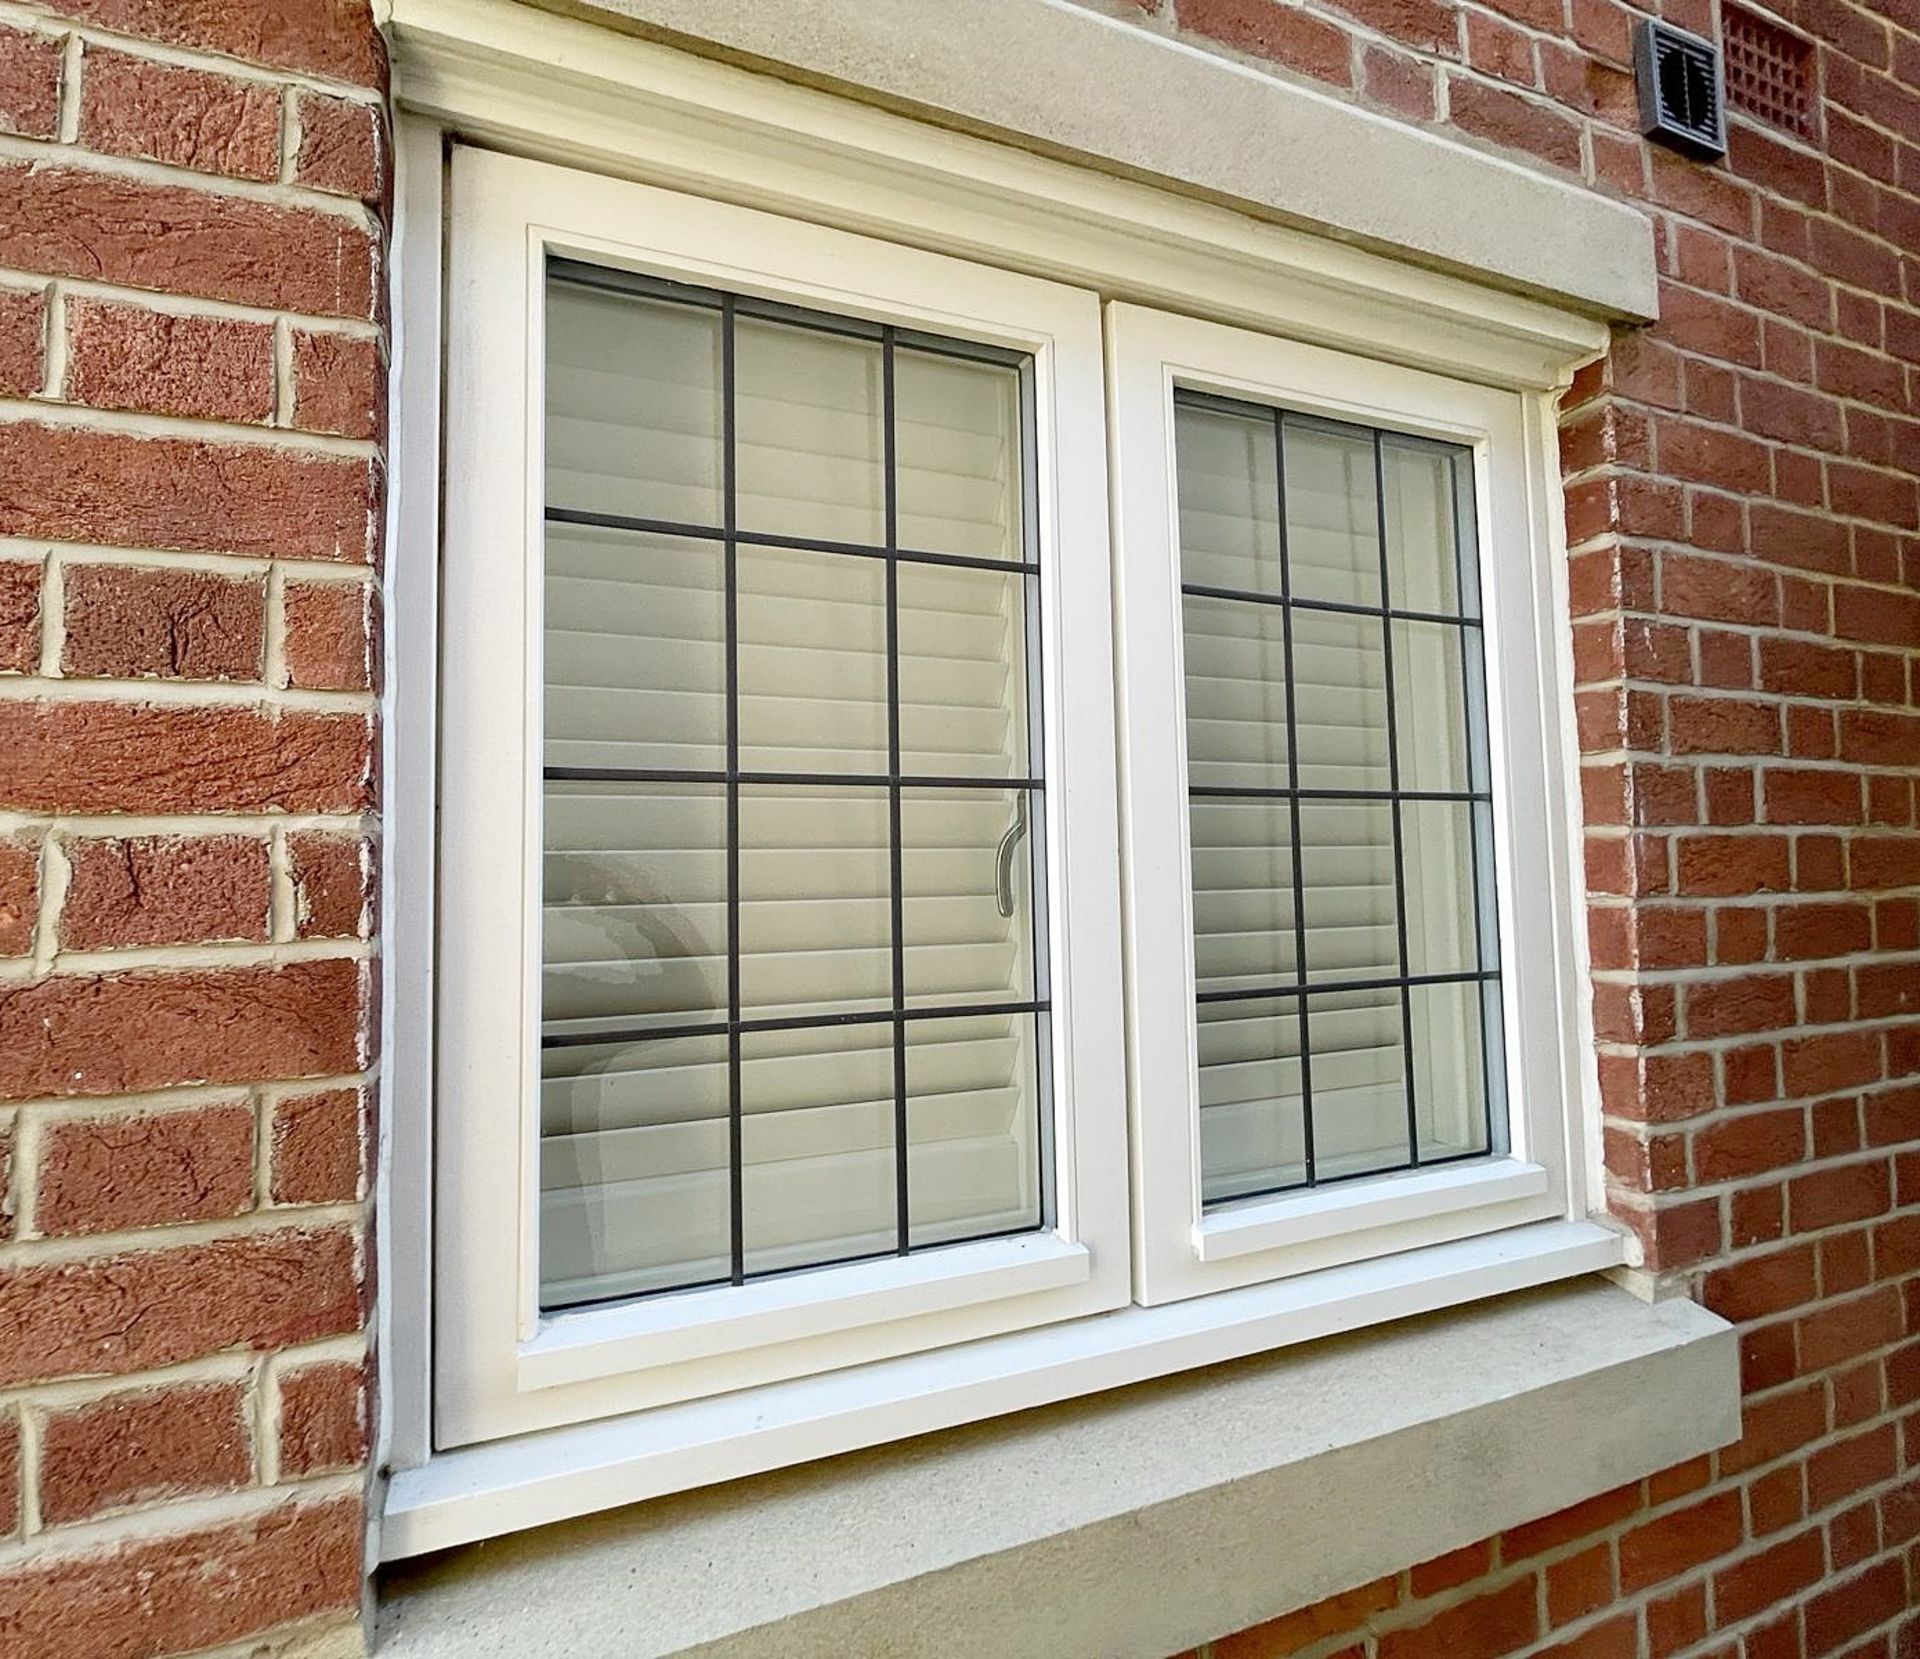 1 x Hardwood Timber Double Glazed Leaded 2-Panel Window Frame fitted with Shutter Blinds - NO VAT - Image 2 of 10